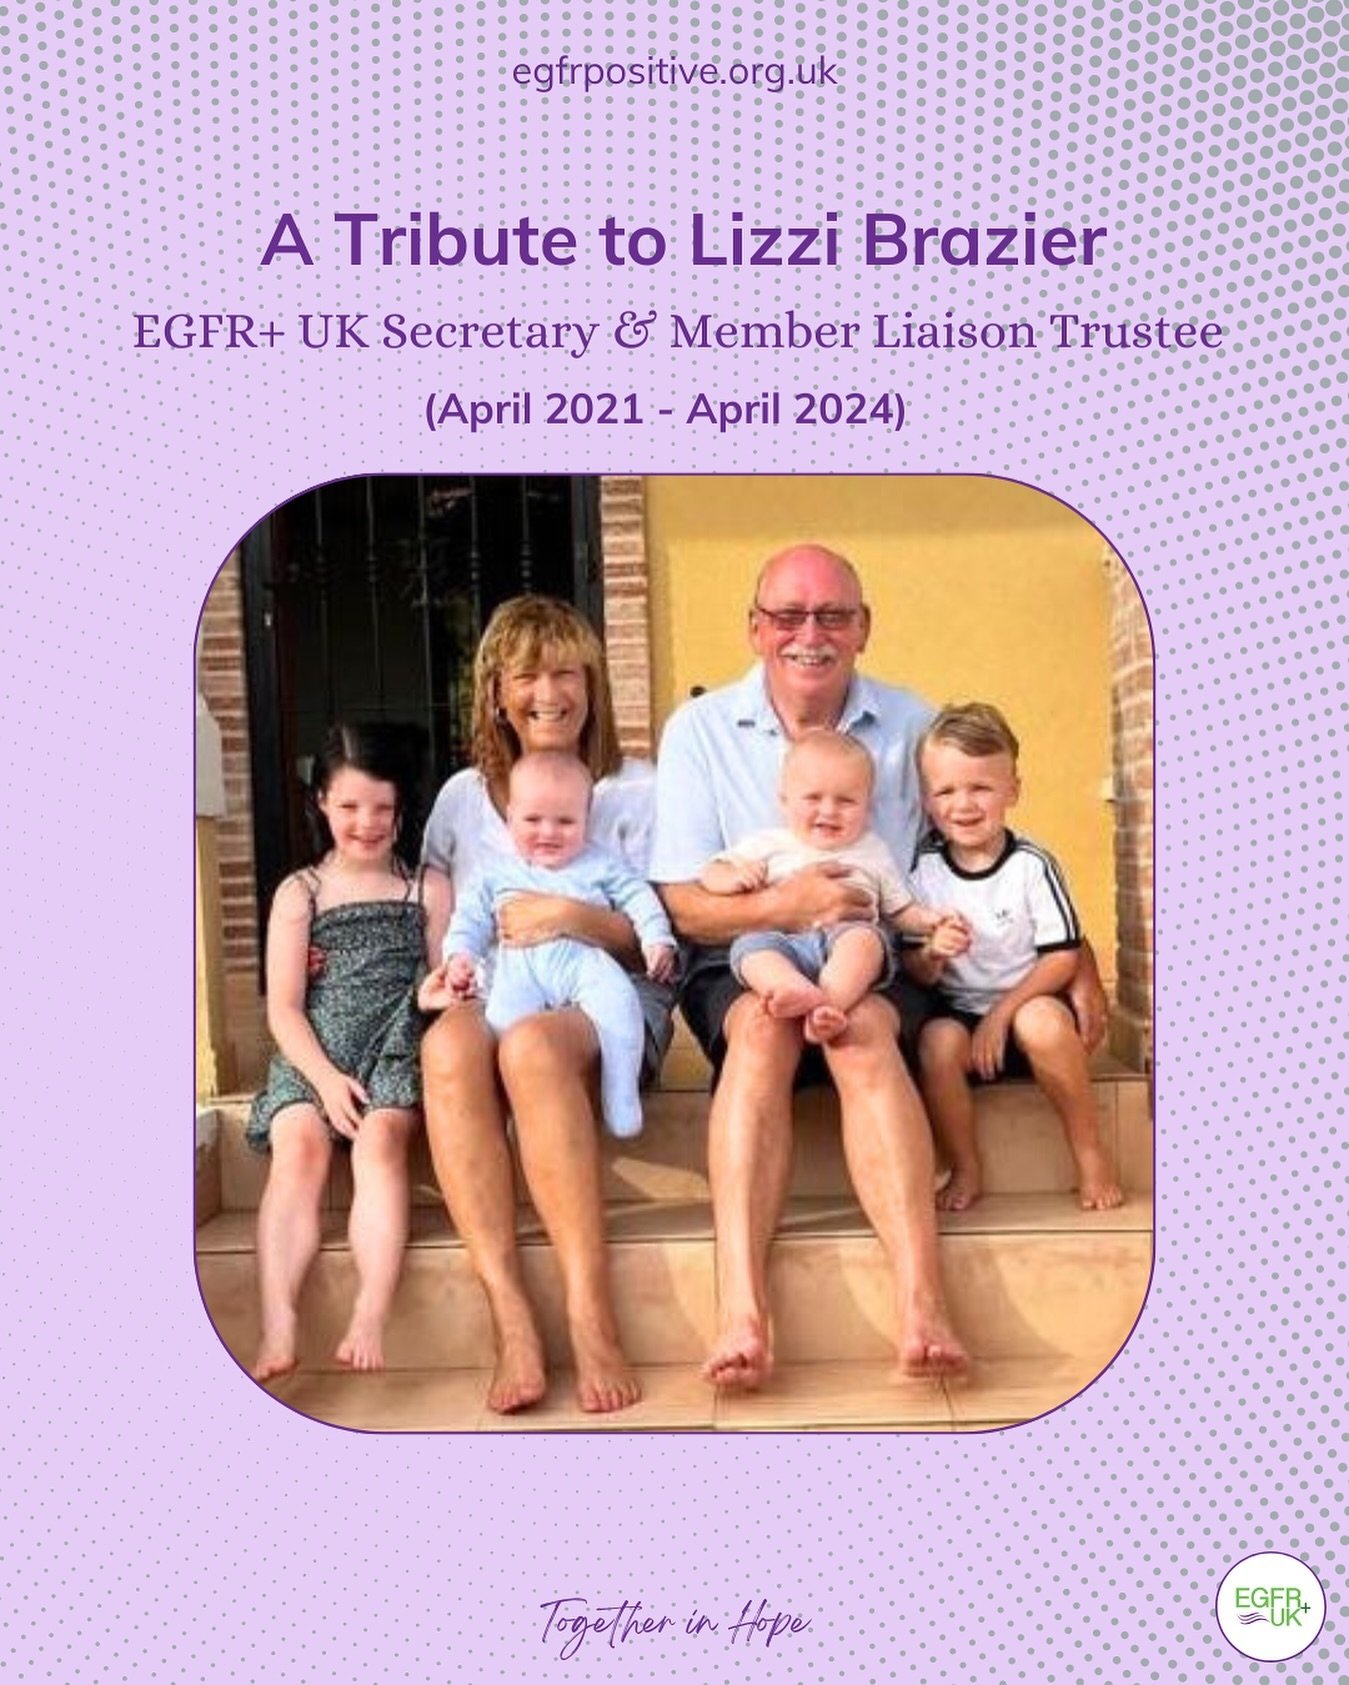 It is with enormous sadness we share the passing of our beloved Lizzi on 21st April. She was peaceful and surrounded by the love and devotion of her wonderful family.

Lizzi was a guiding light in our community, bringing us together with her boundles